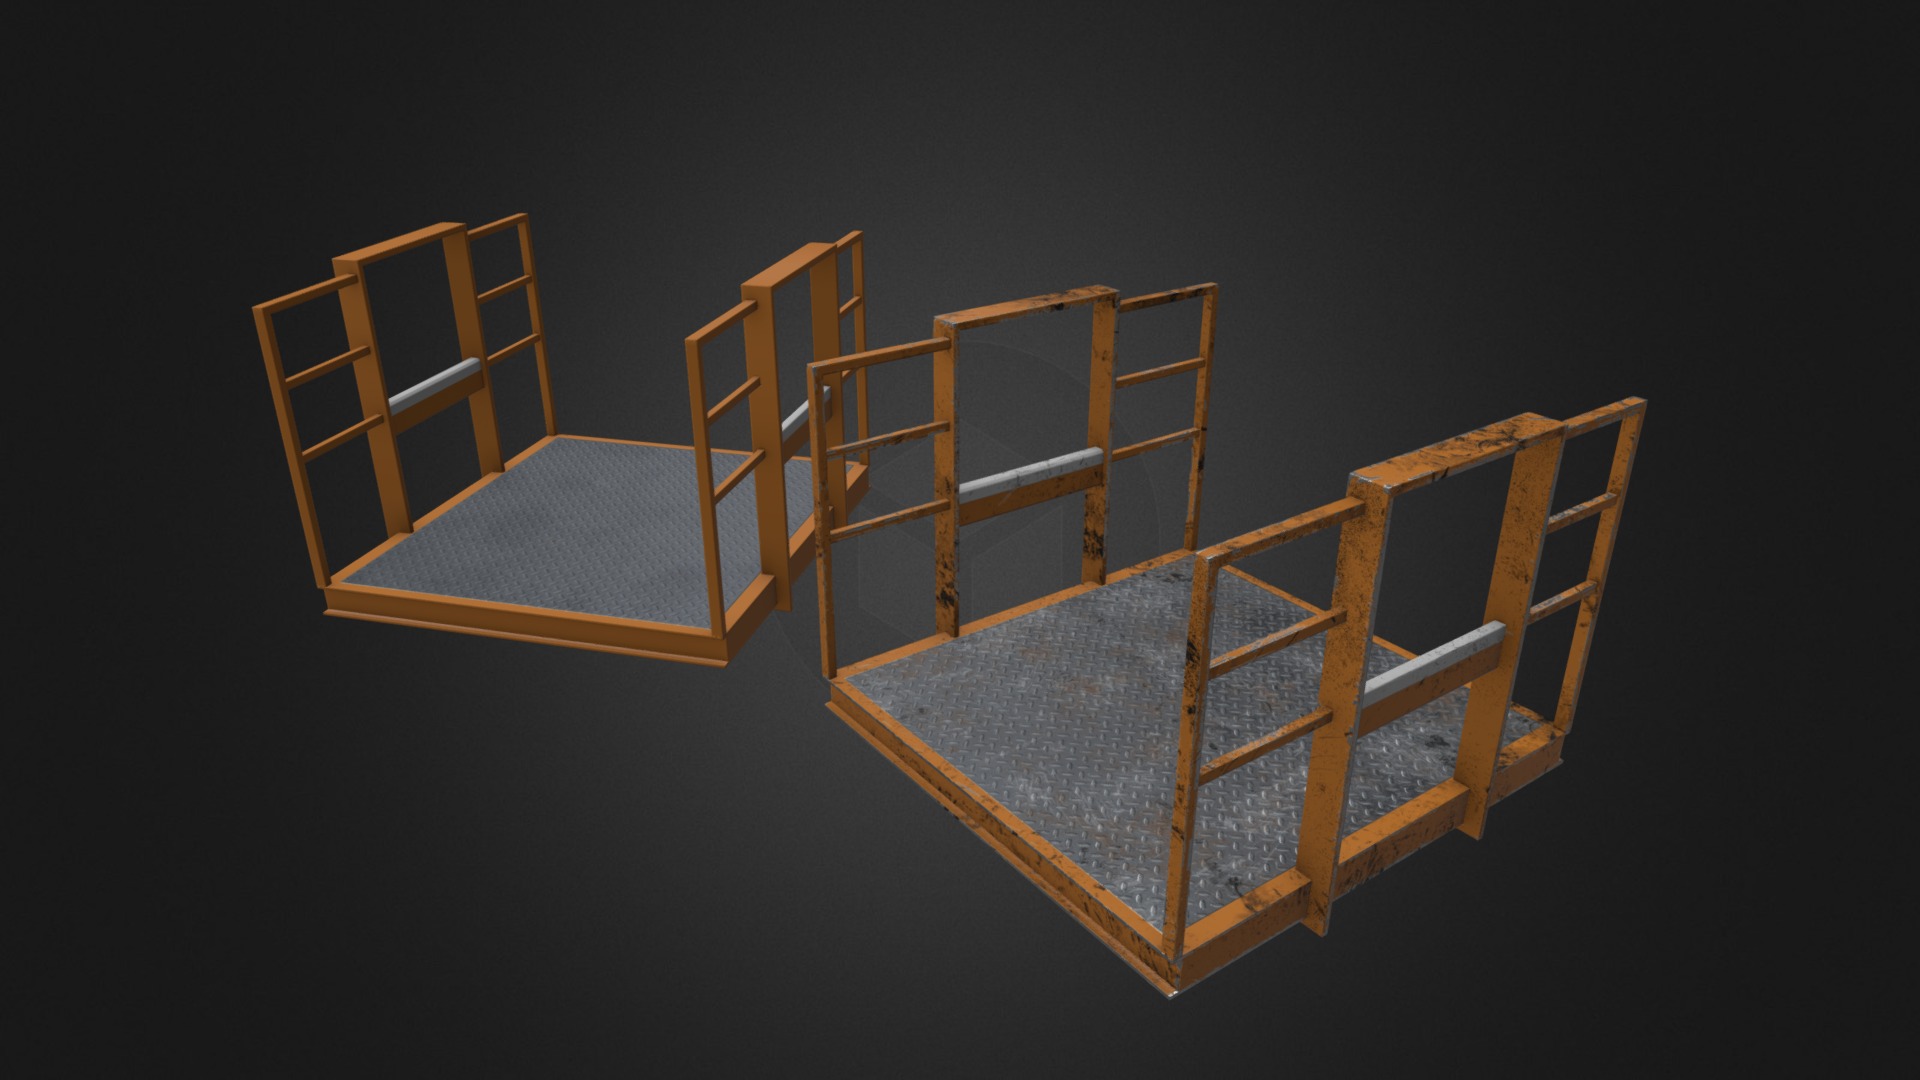 3D model Lift 2 - This is a 3D model of the Lift 2. The 3D model is about a wooden structure with a basket.